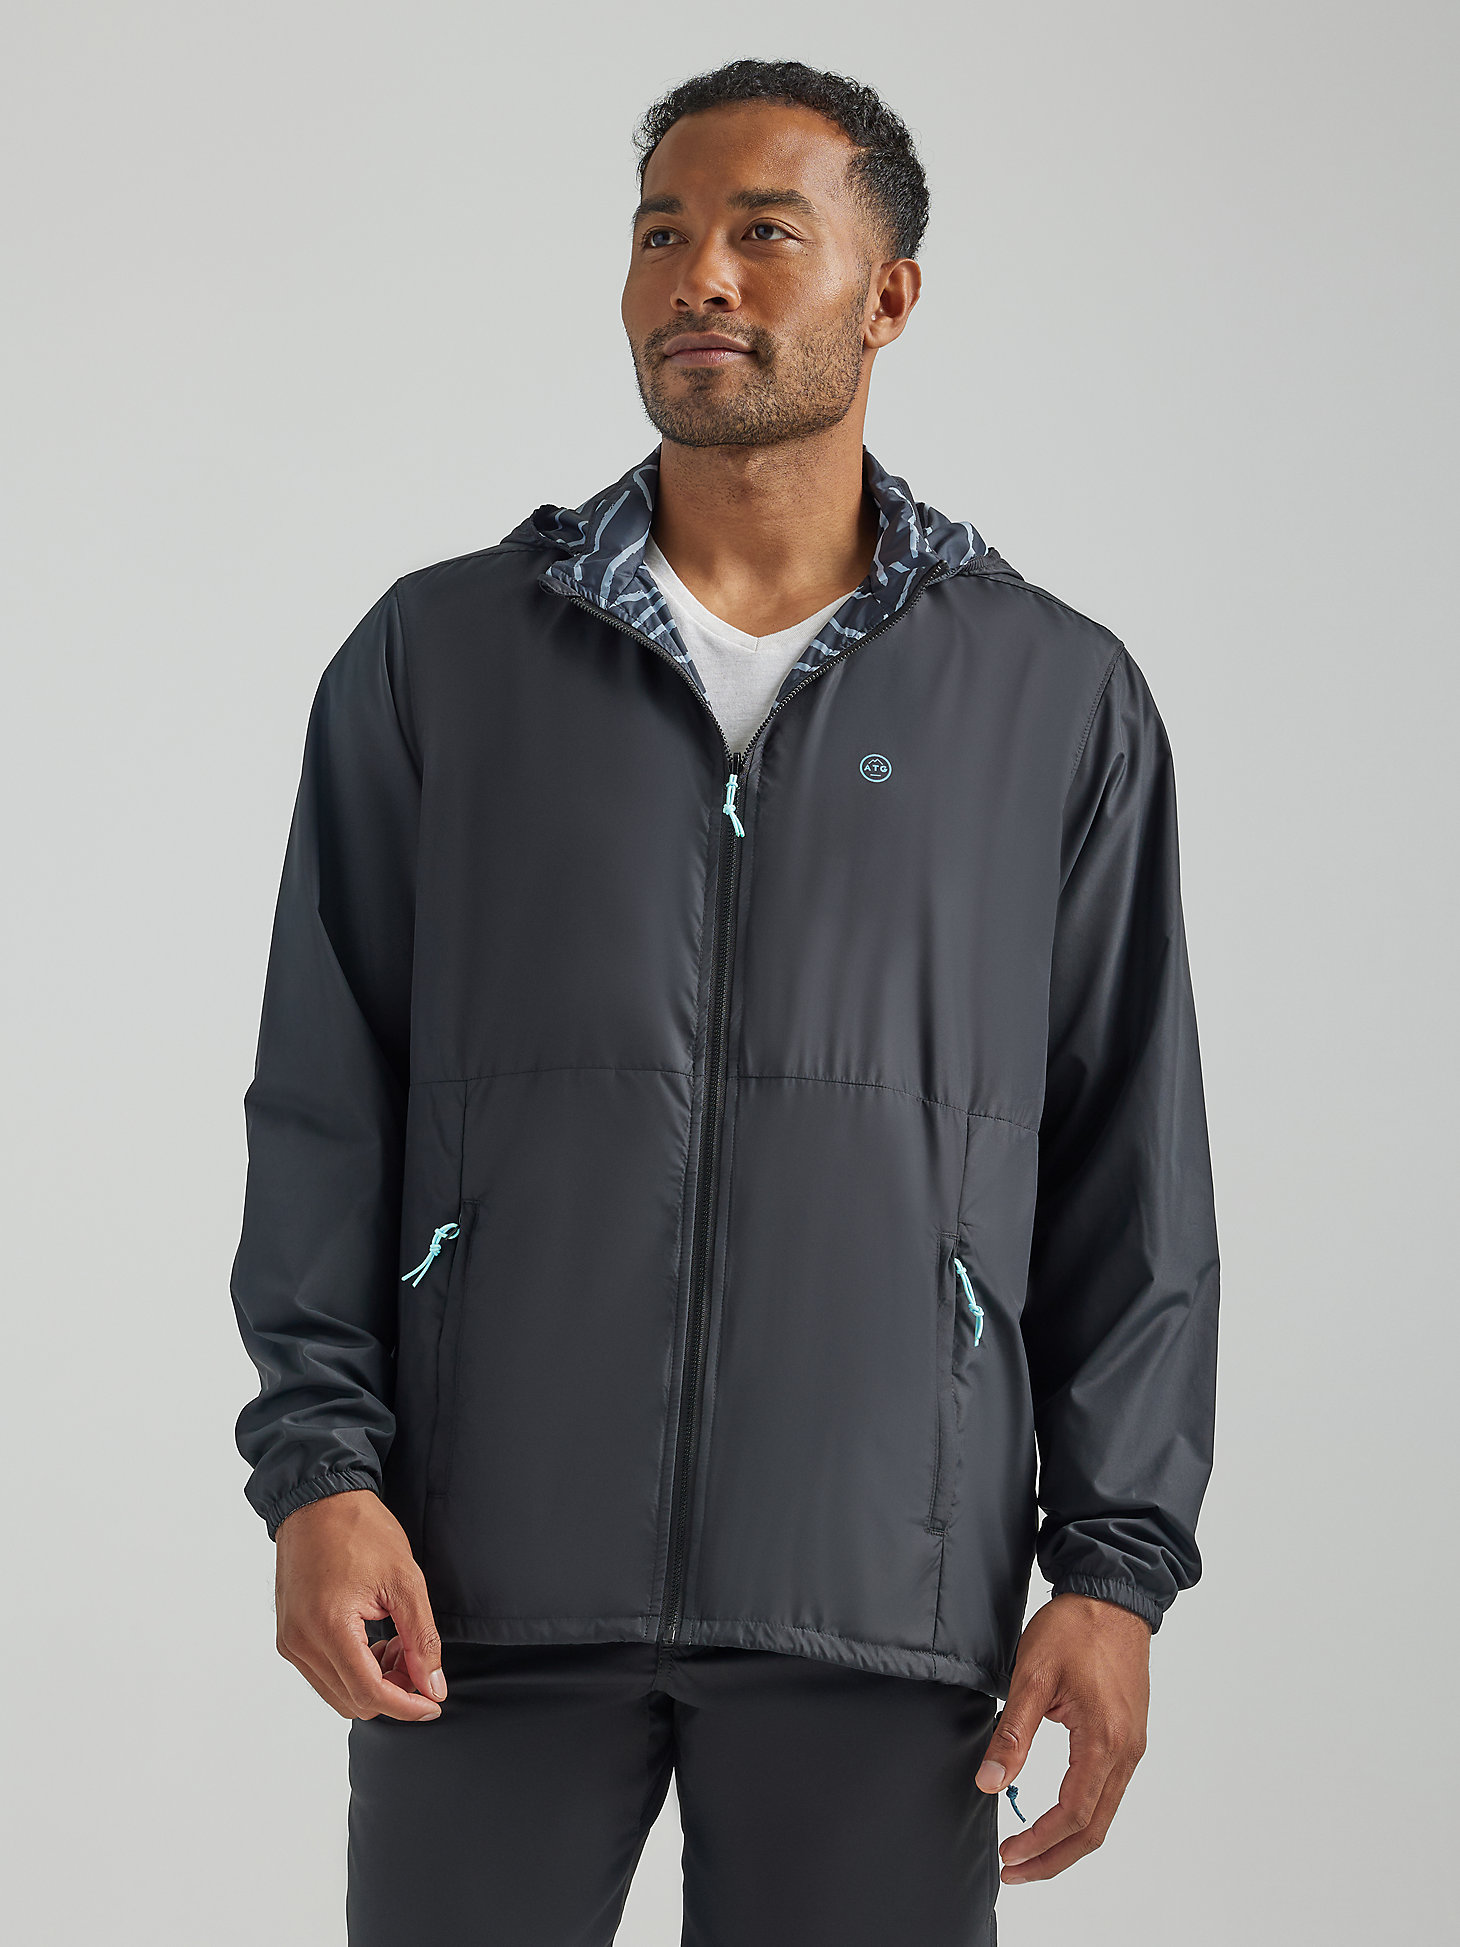 Lightweight Packable Jacket in Black main view